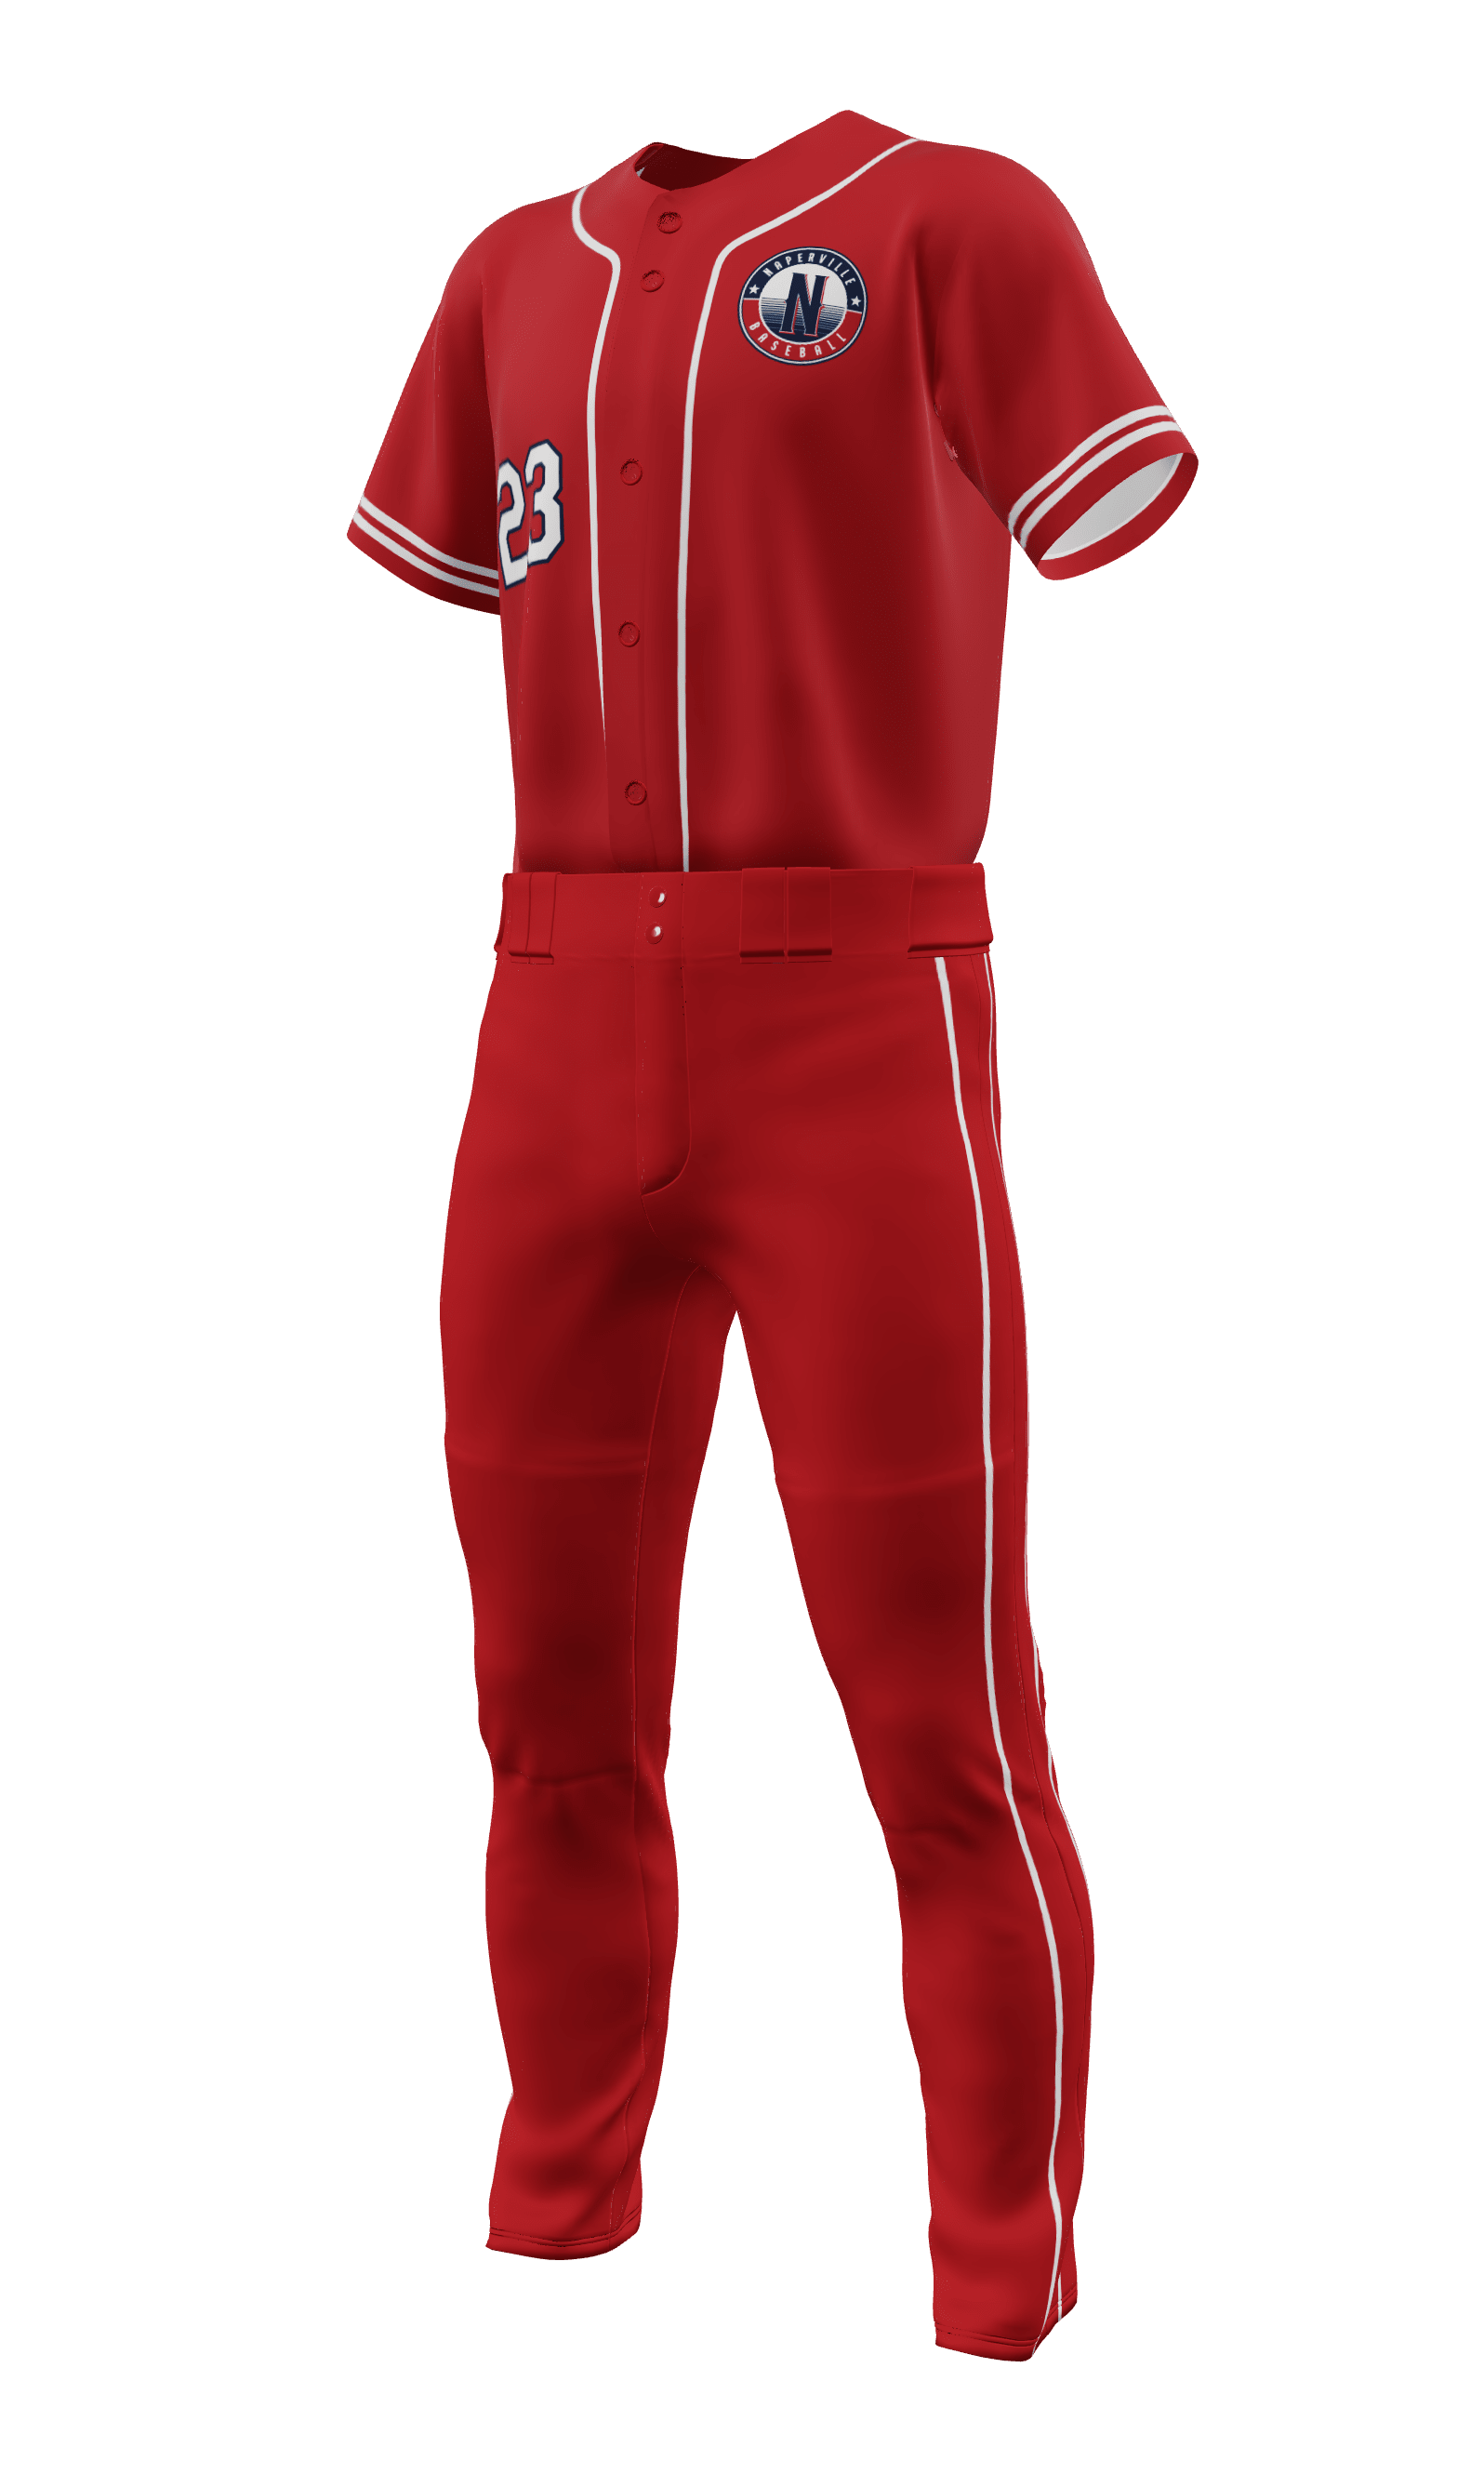 Left Red Nationals Full Button Short Sleeve Jersey & Pant